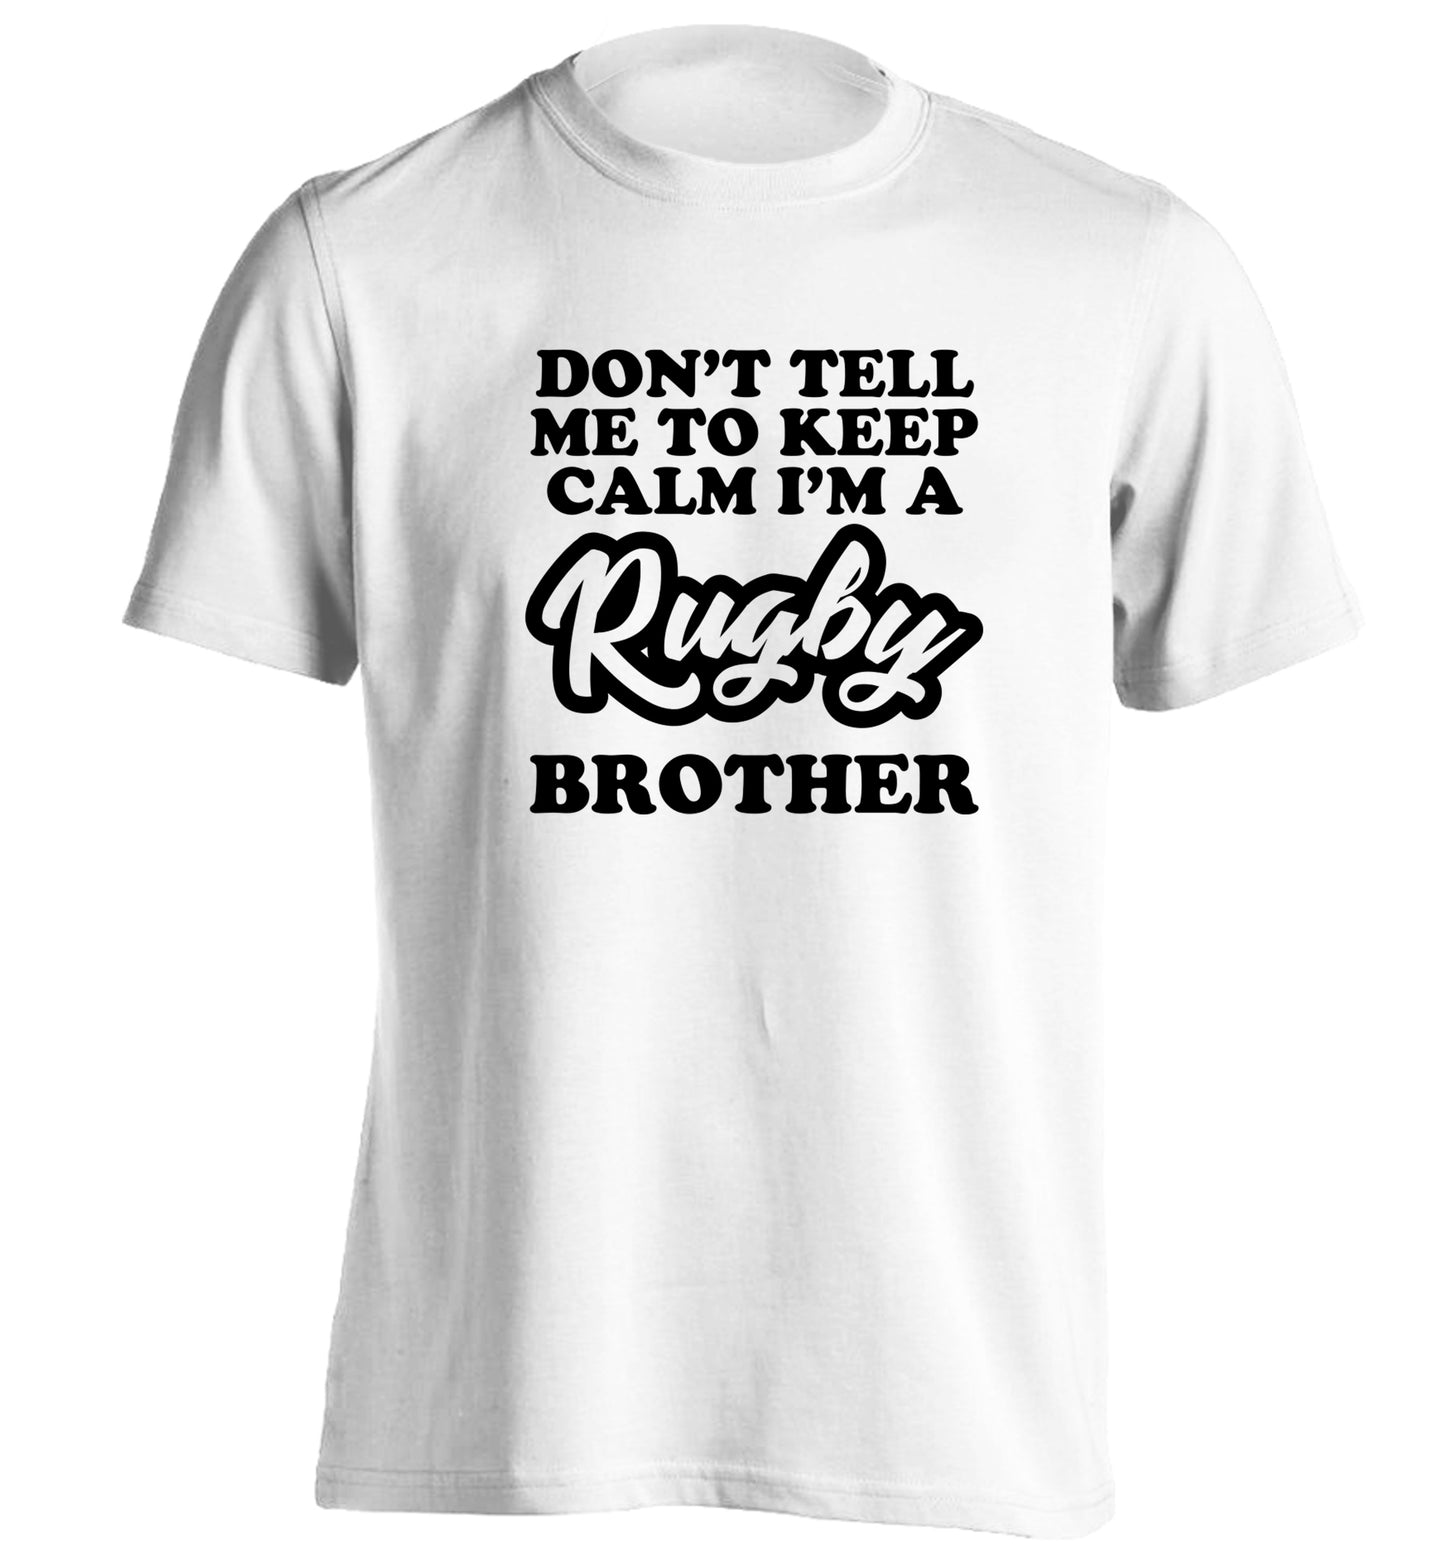 Don't tell me keep calm I'm a rugby brother adults unisex white Tshirt 2XL